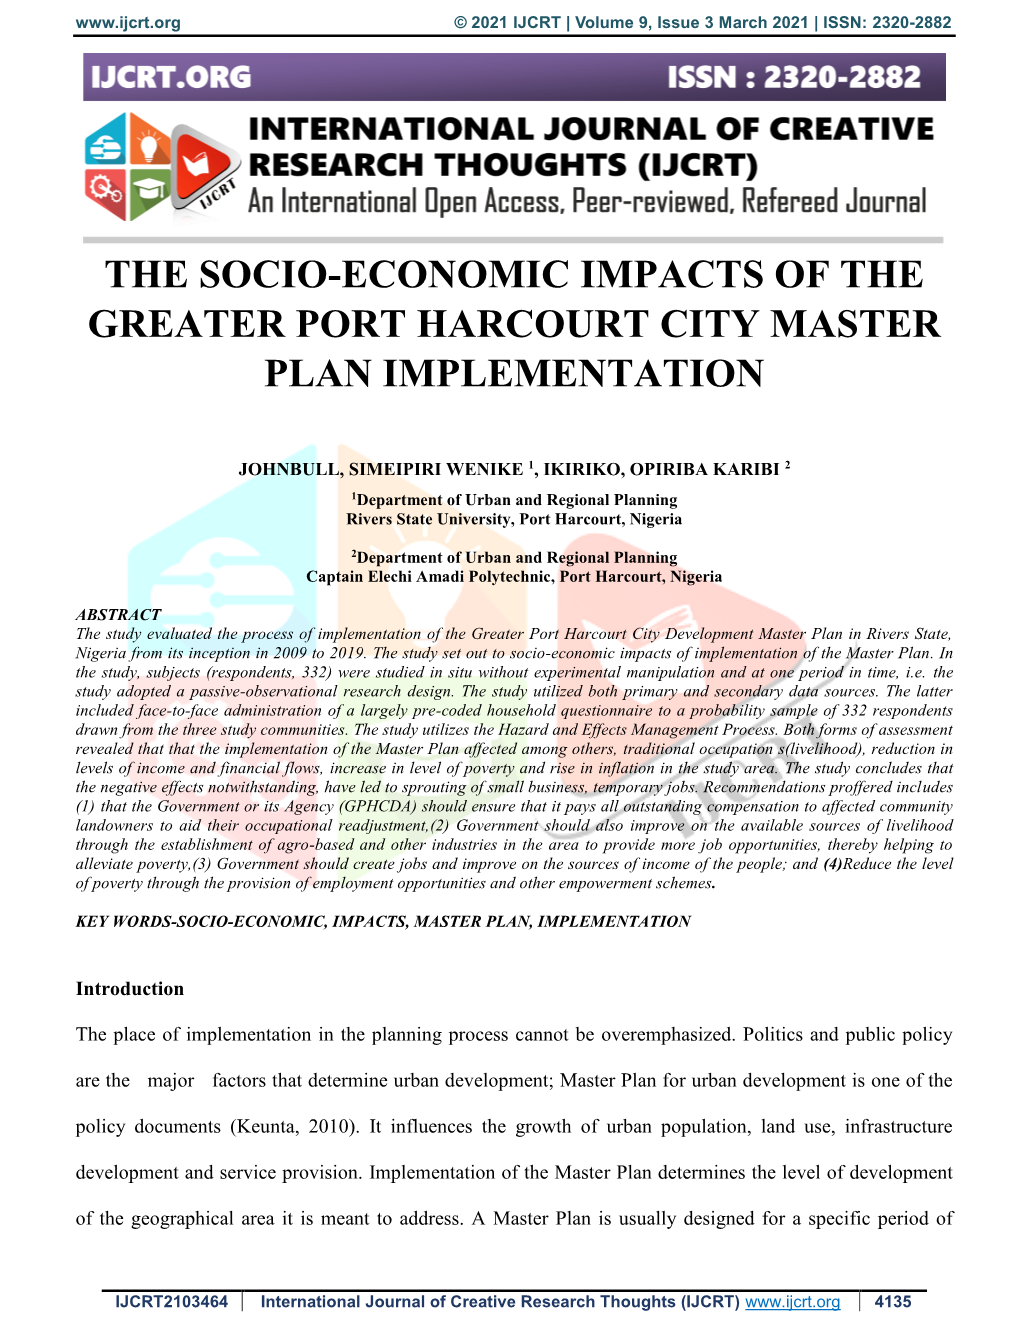 The Socio-Economic Impacts of the Greater Port Harcourt City Master Plan Implementation